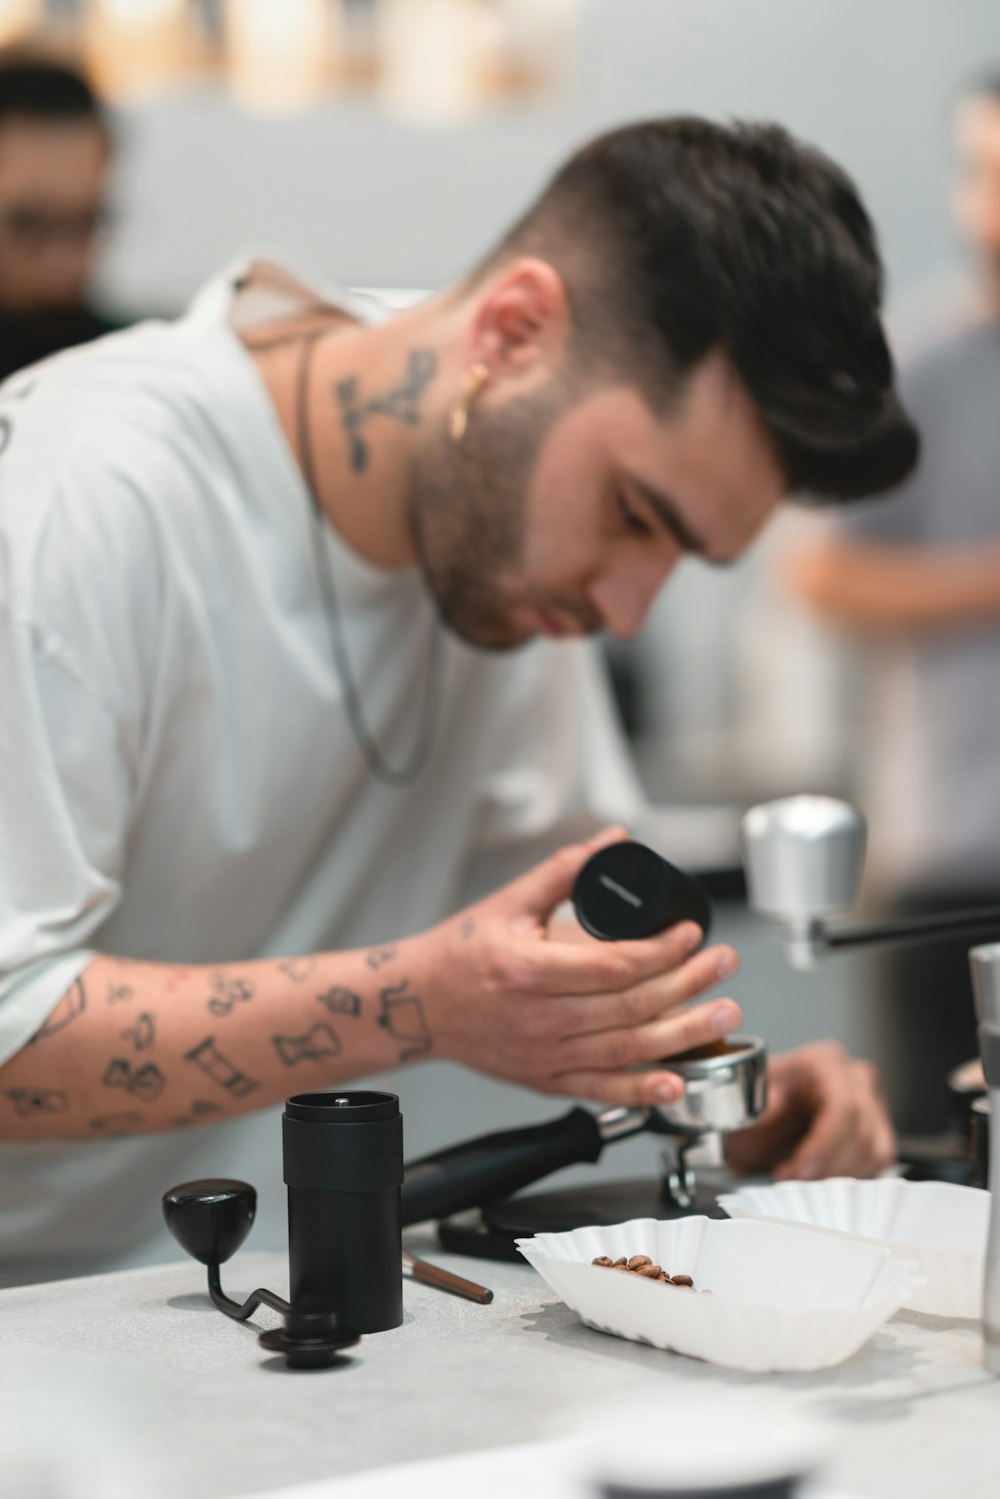 a man with a tattoo on his arm working on a machine